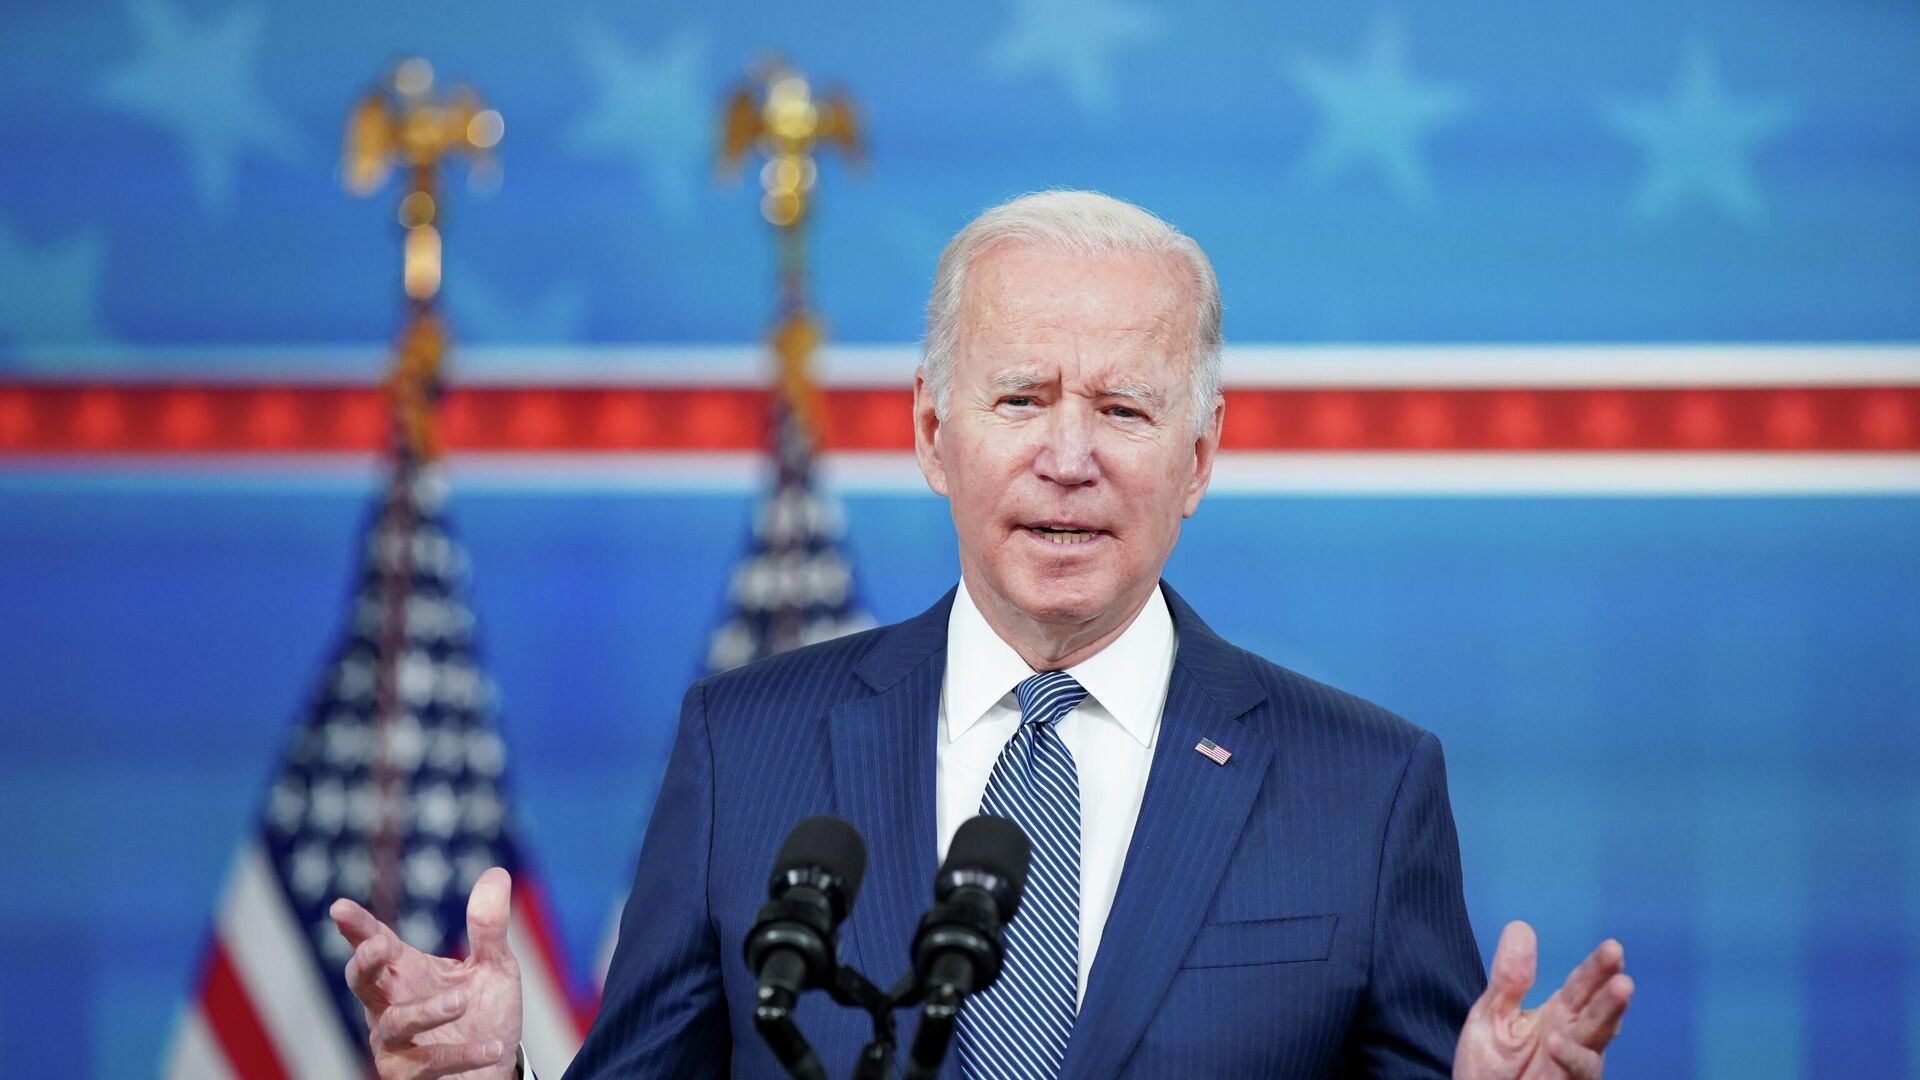 U.S. President Joe Biden speaks about his administration's efforts to ease supply chain issues during the holiday season, at the White House in Washington, U.S., December 1, 2021. - Sputnik International, 1920, 15.12.2021